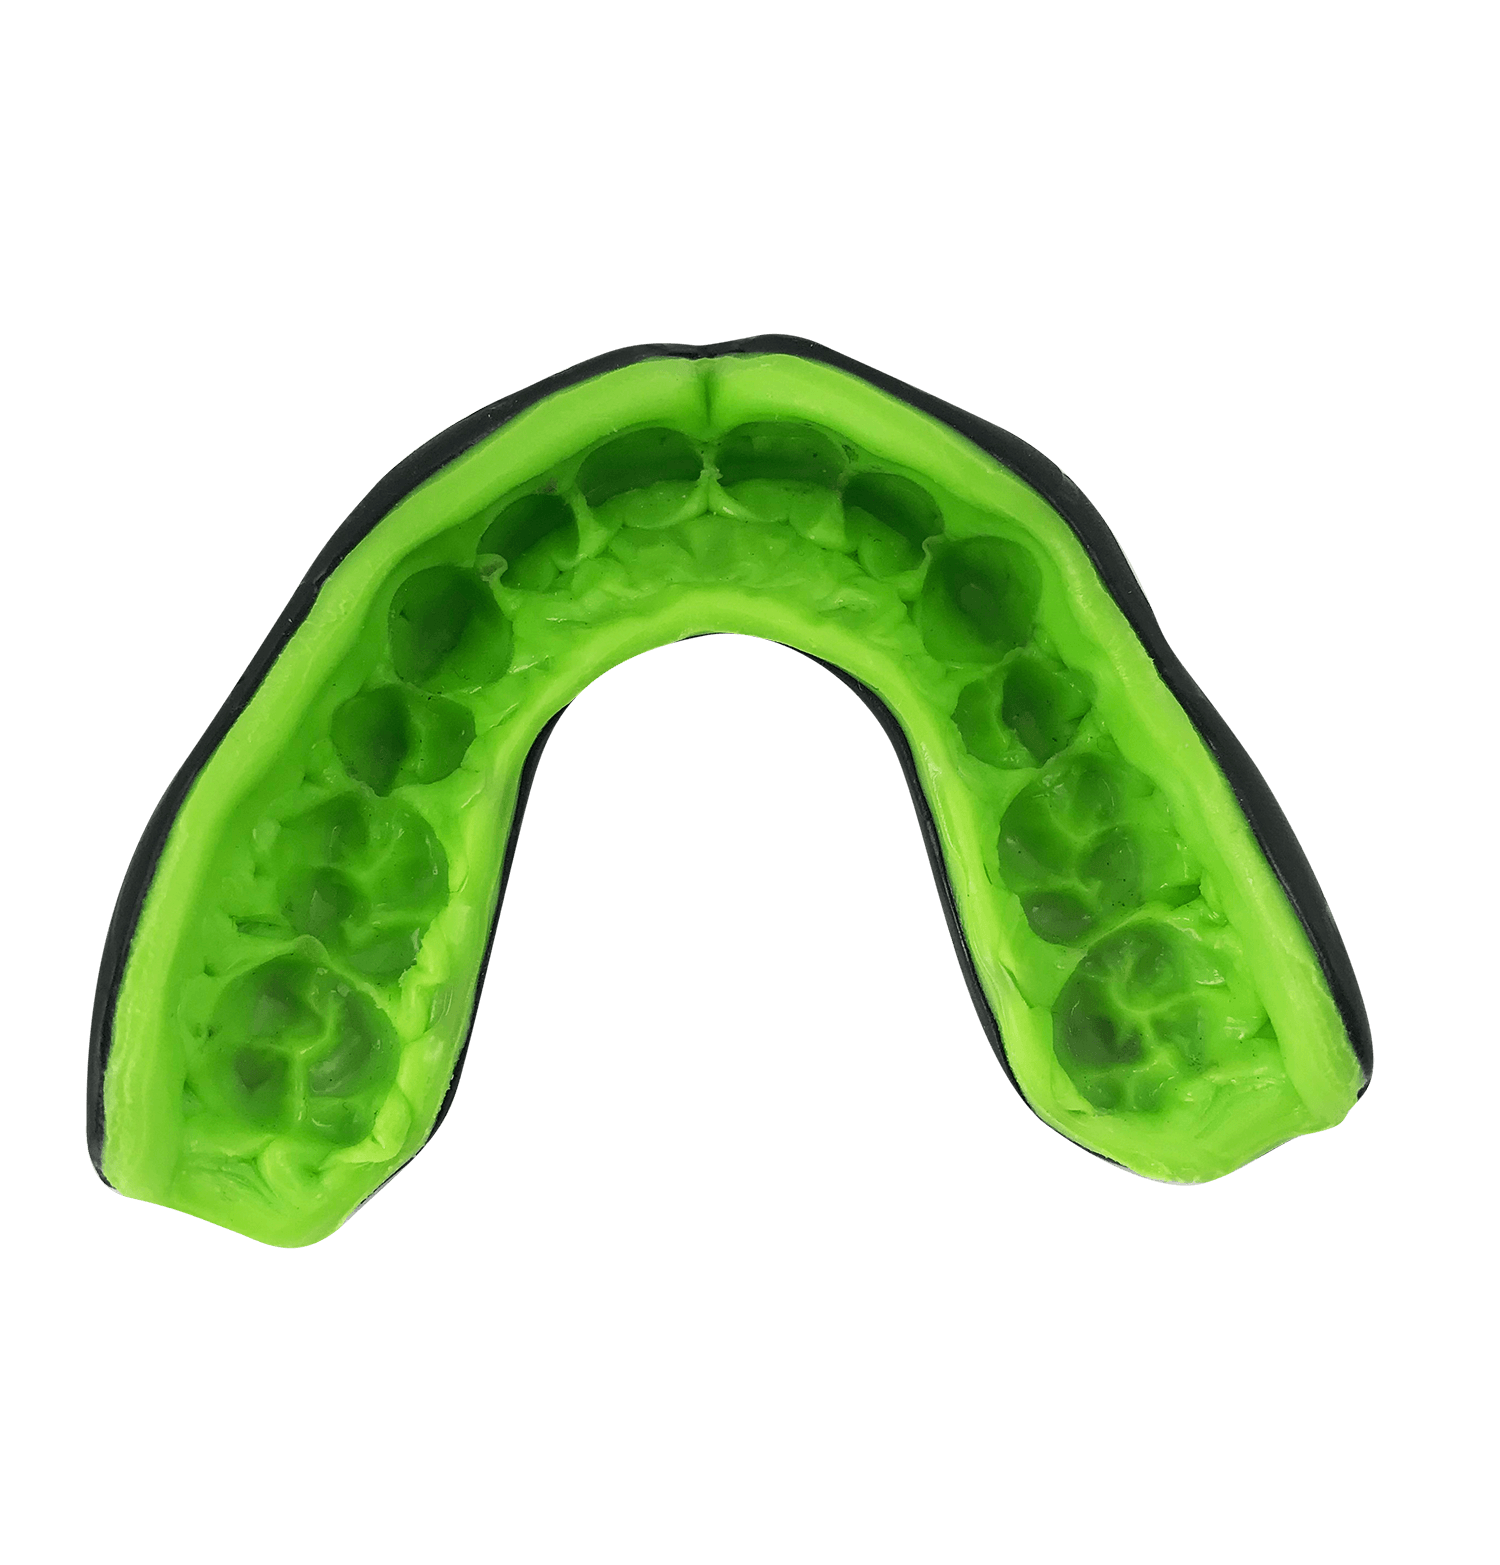 Correcting Initial Mouthguard Fit or Comfort Issues, Part 2